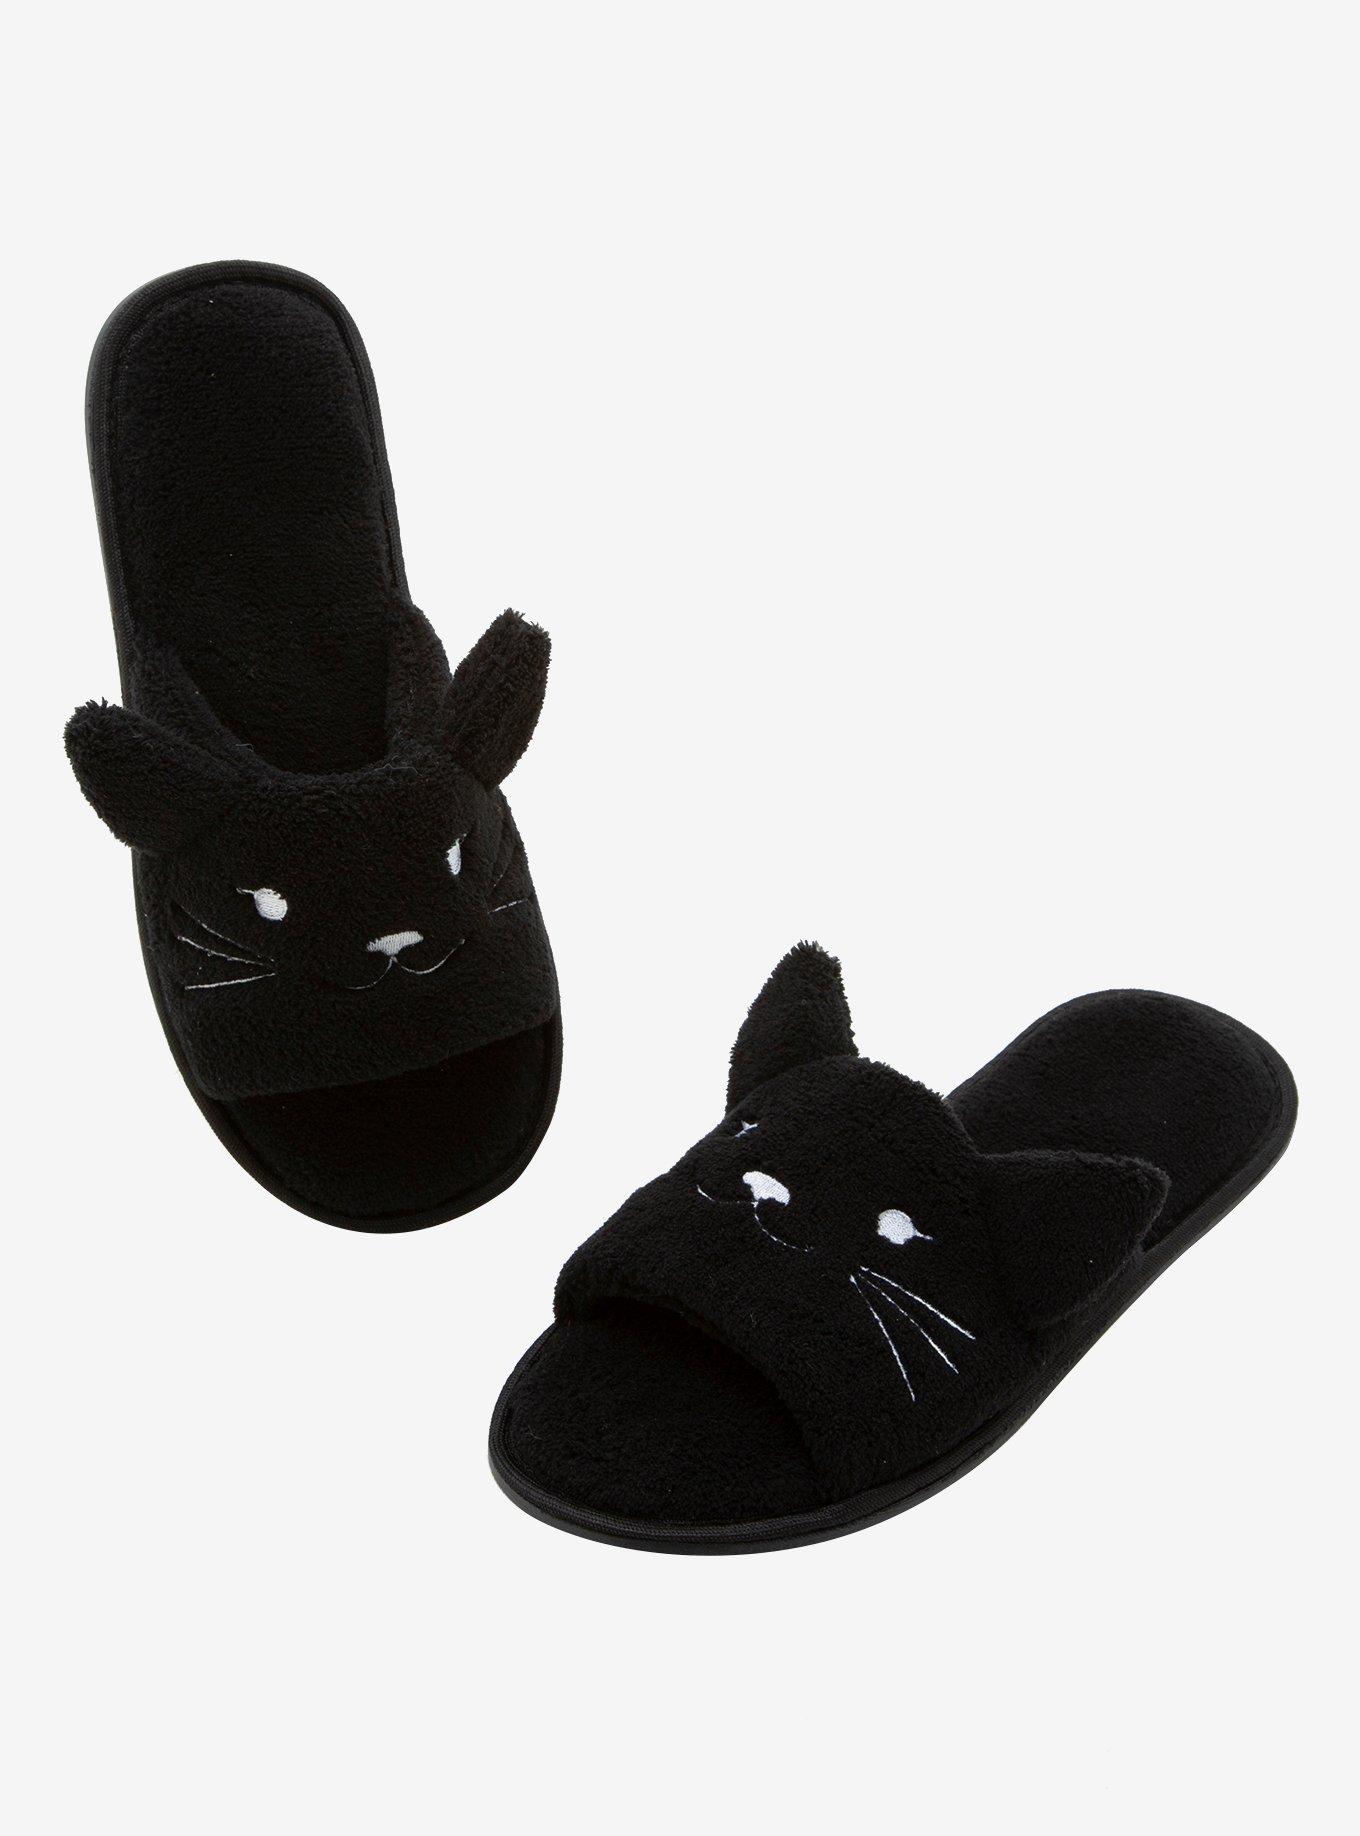 Black Cat Fuzzy Spa Slippers | Hot Topic